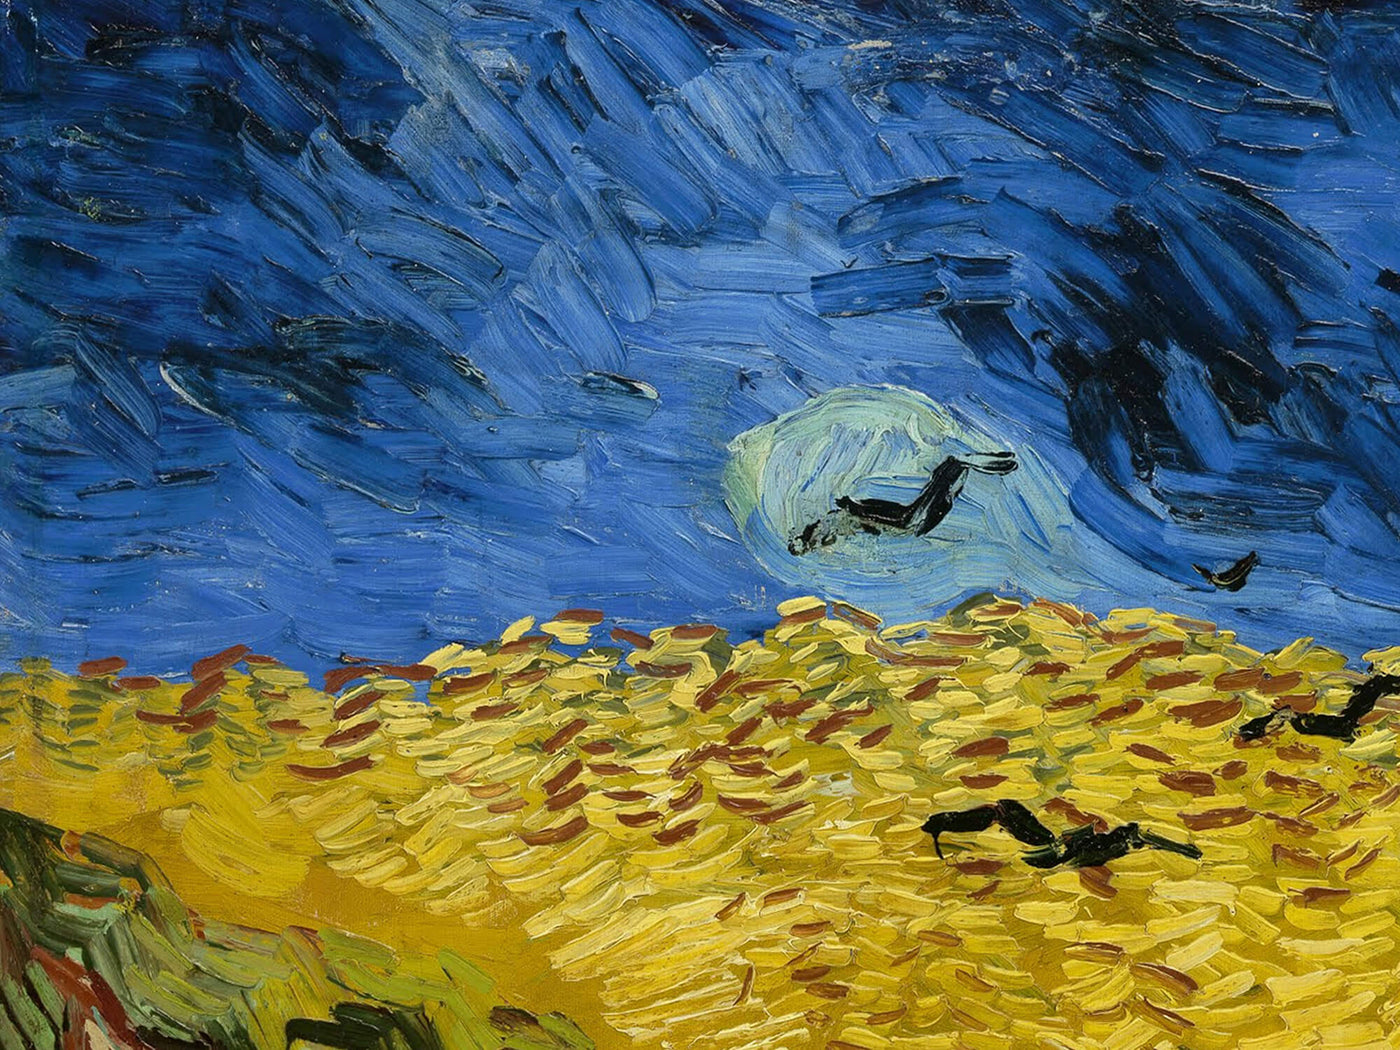 Blue and yellow art paint by Van Gogh